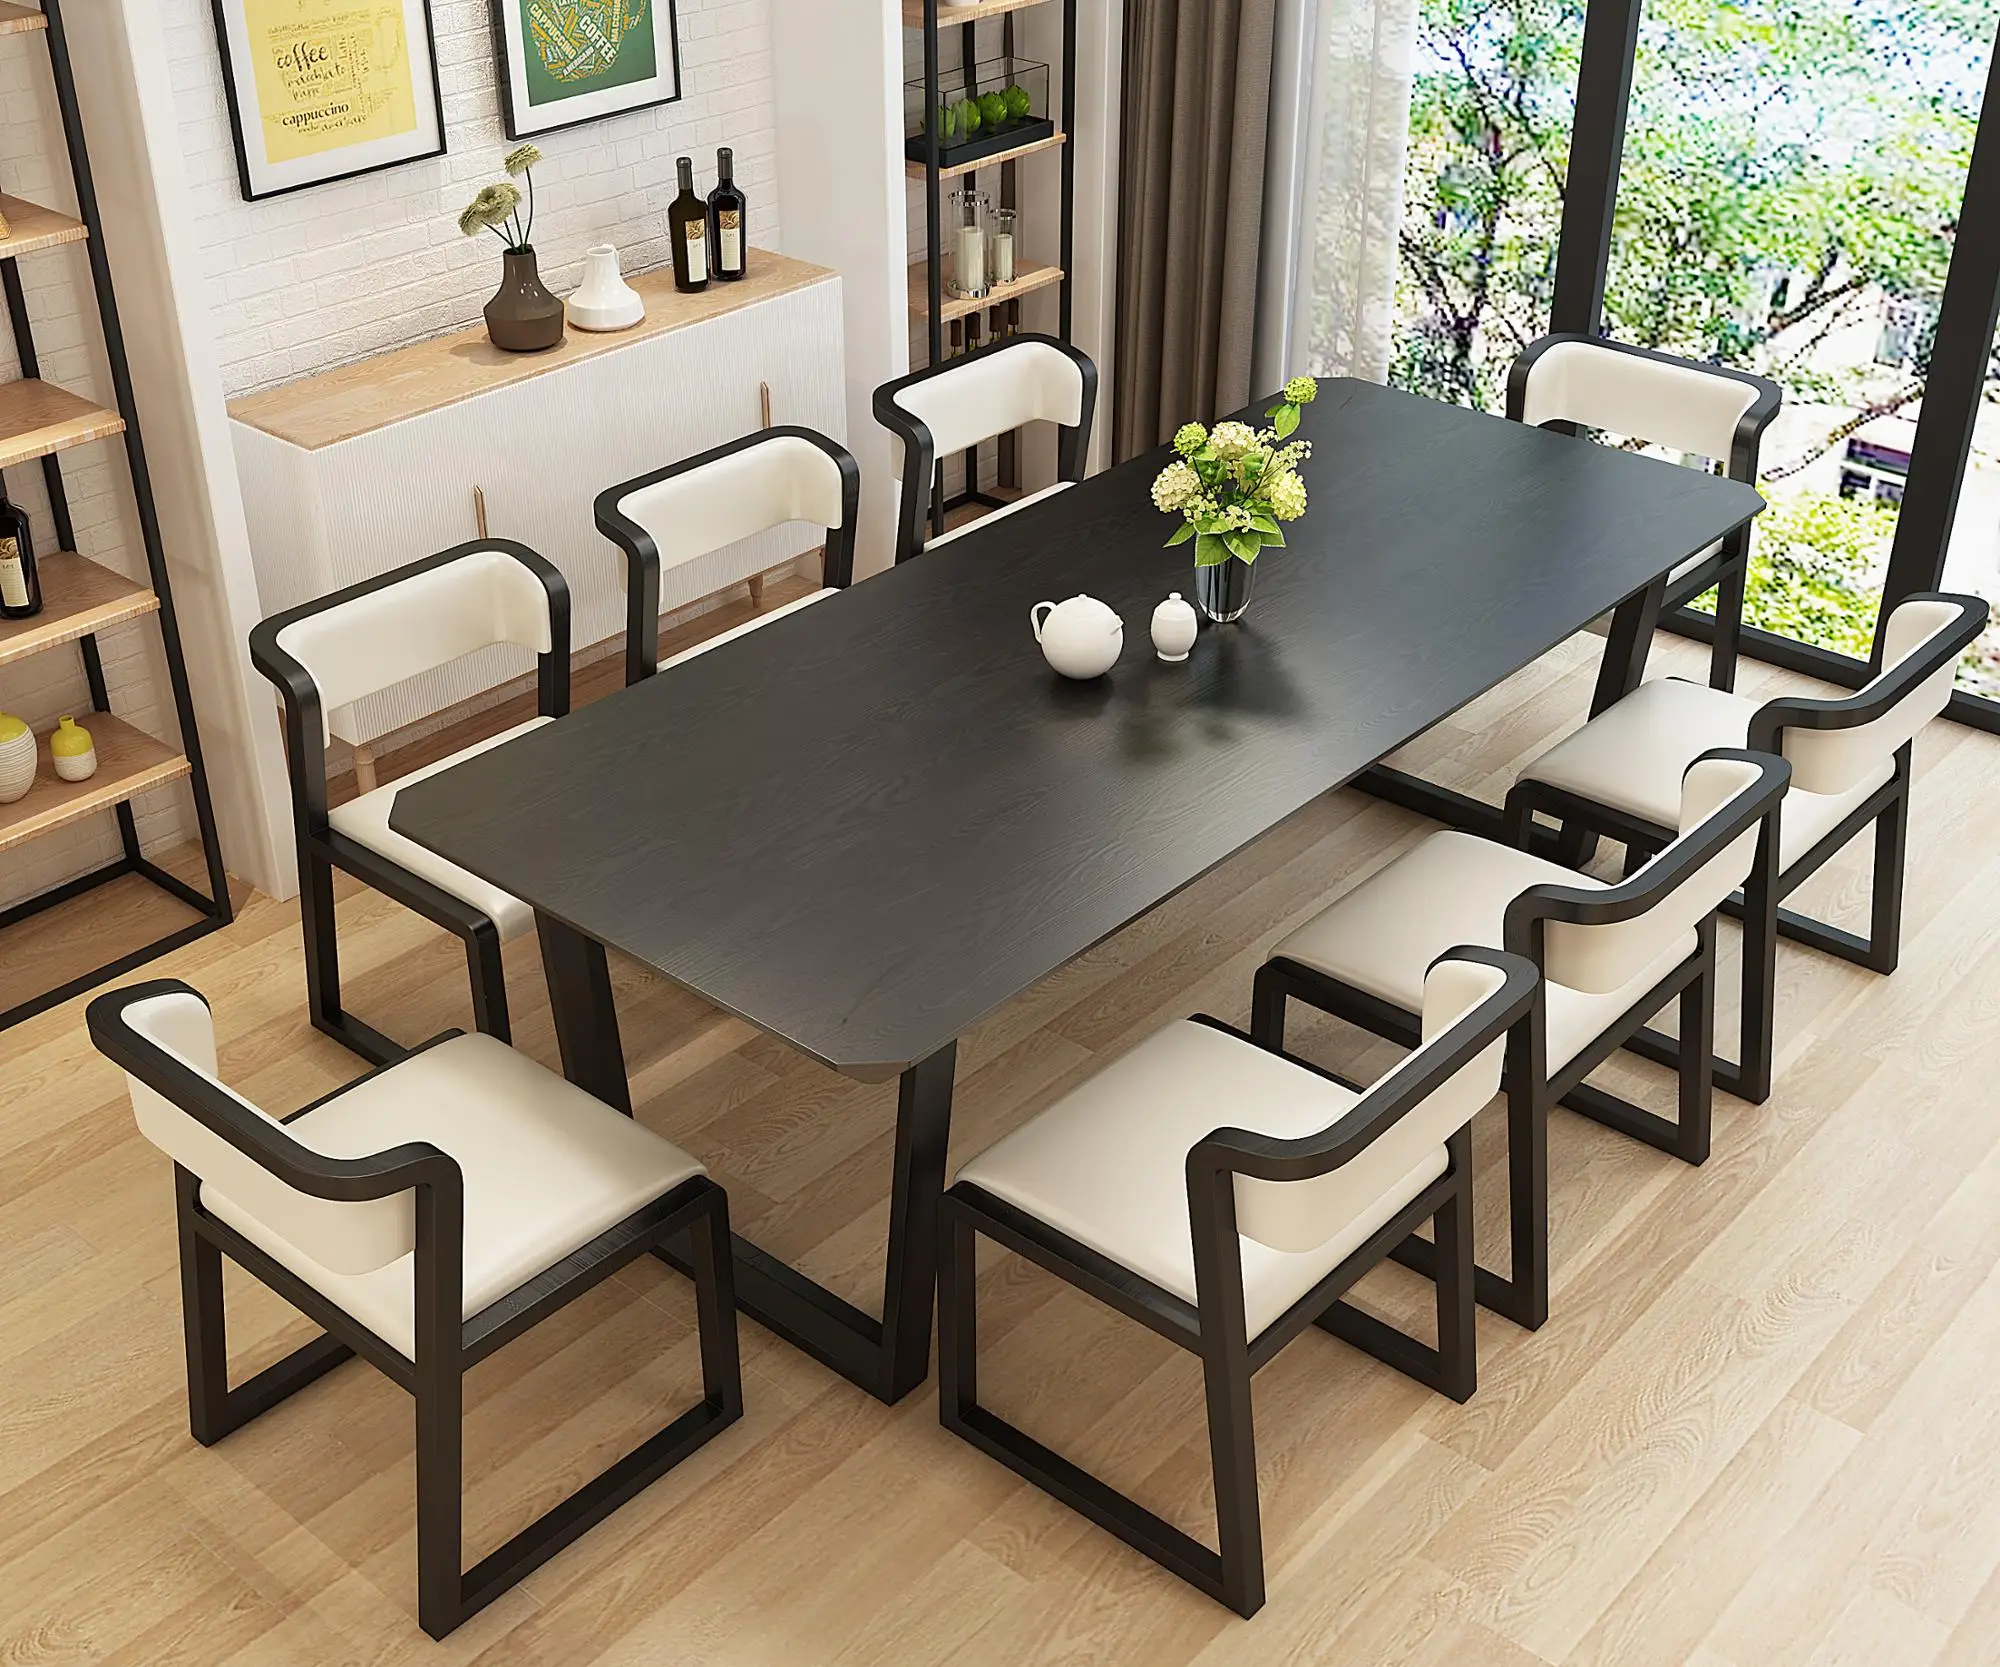 Modern Design 8 Seater Dining Table Set - Buy 8 Seater Dining Table ...